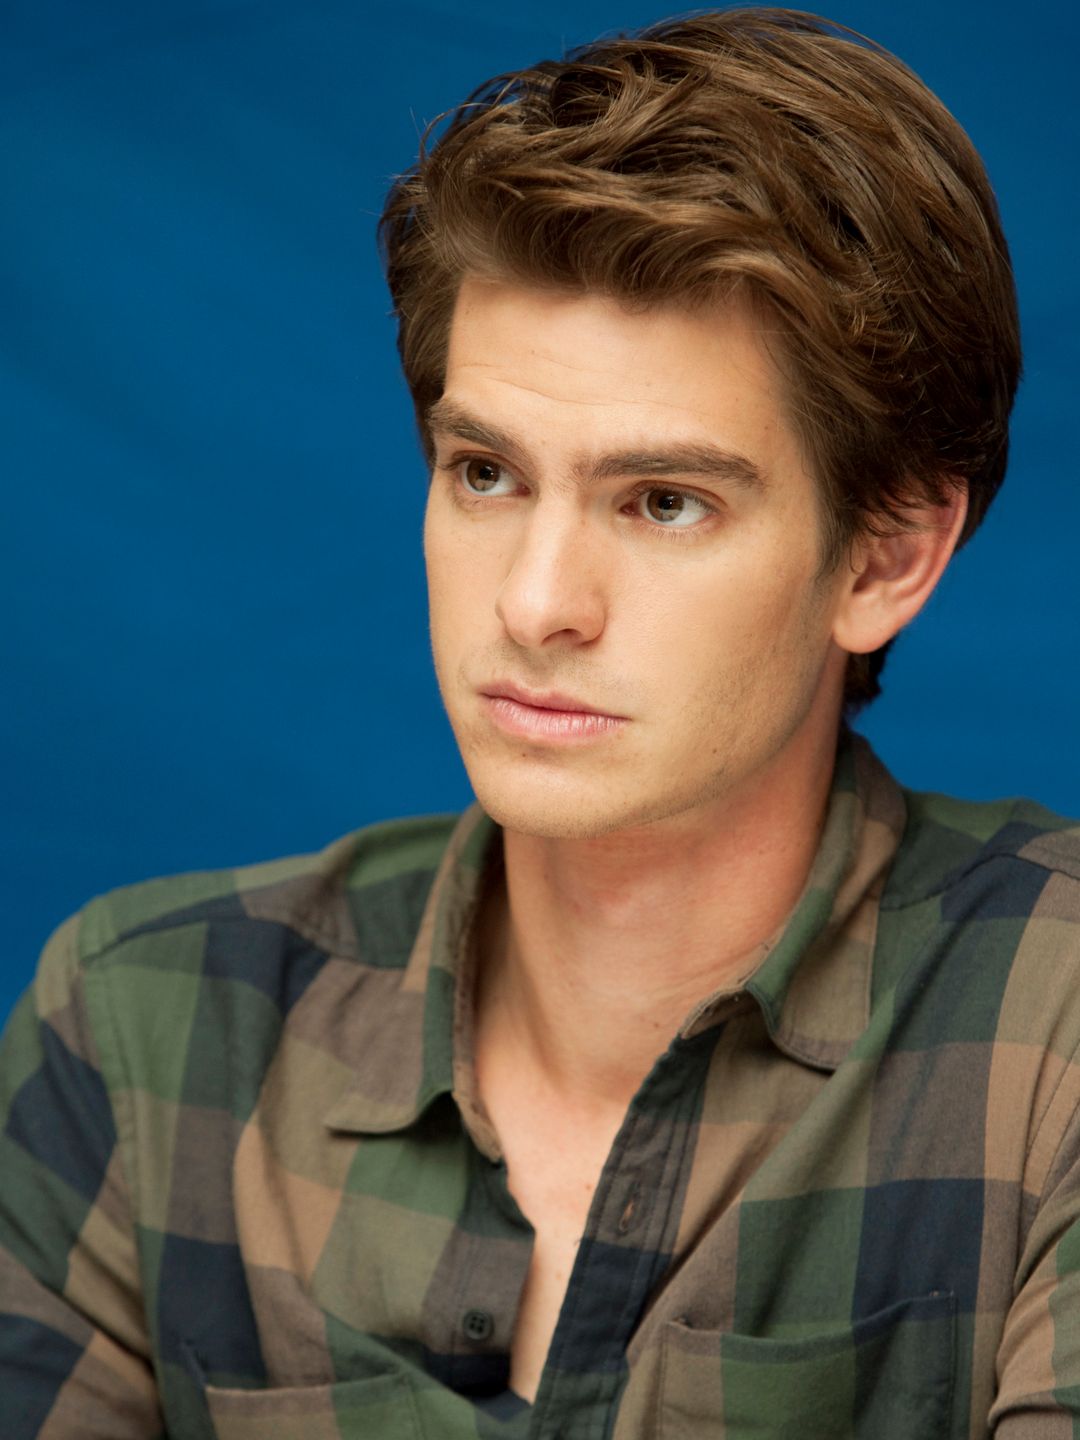 Andrew Garfield does he have kids